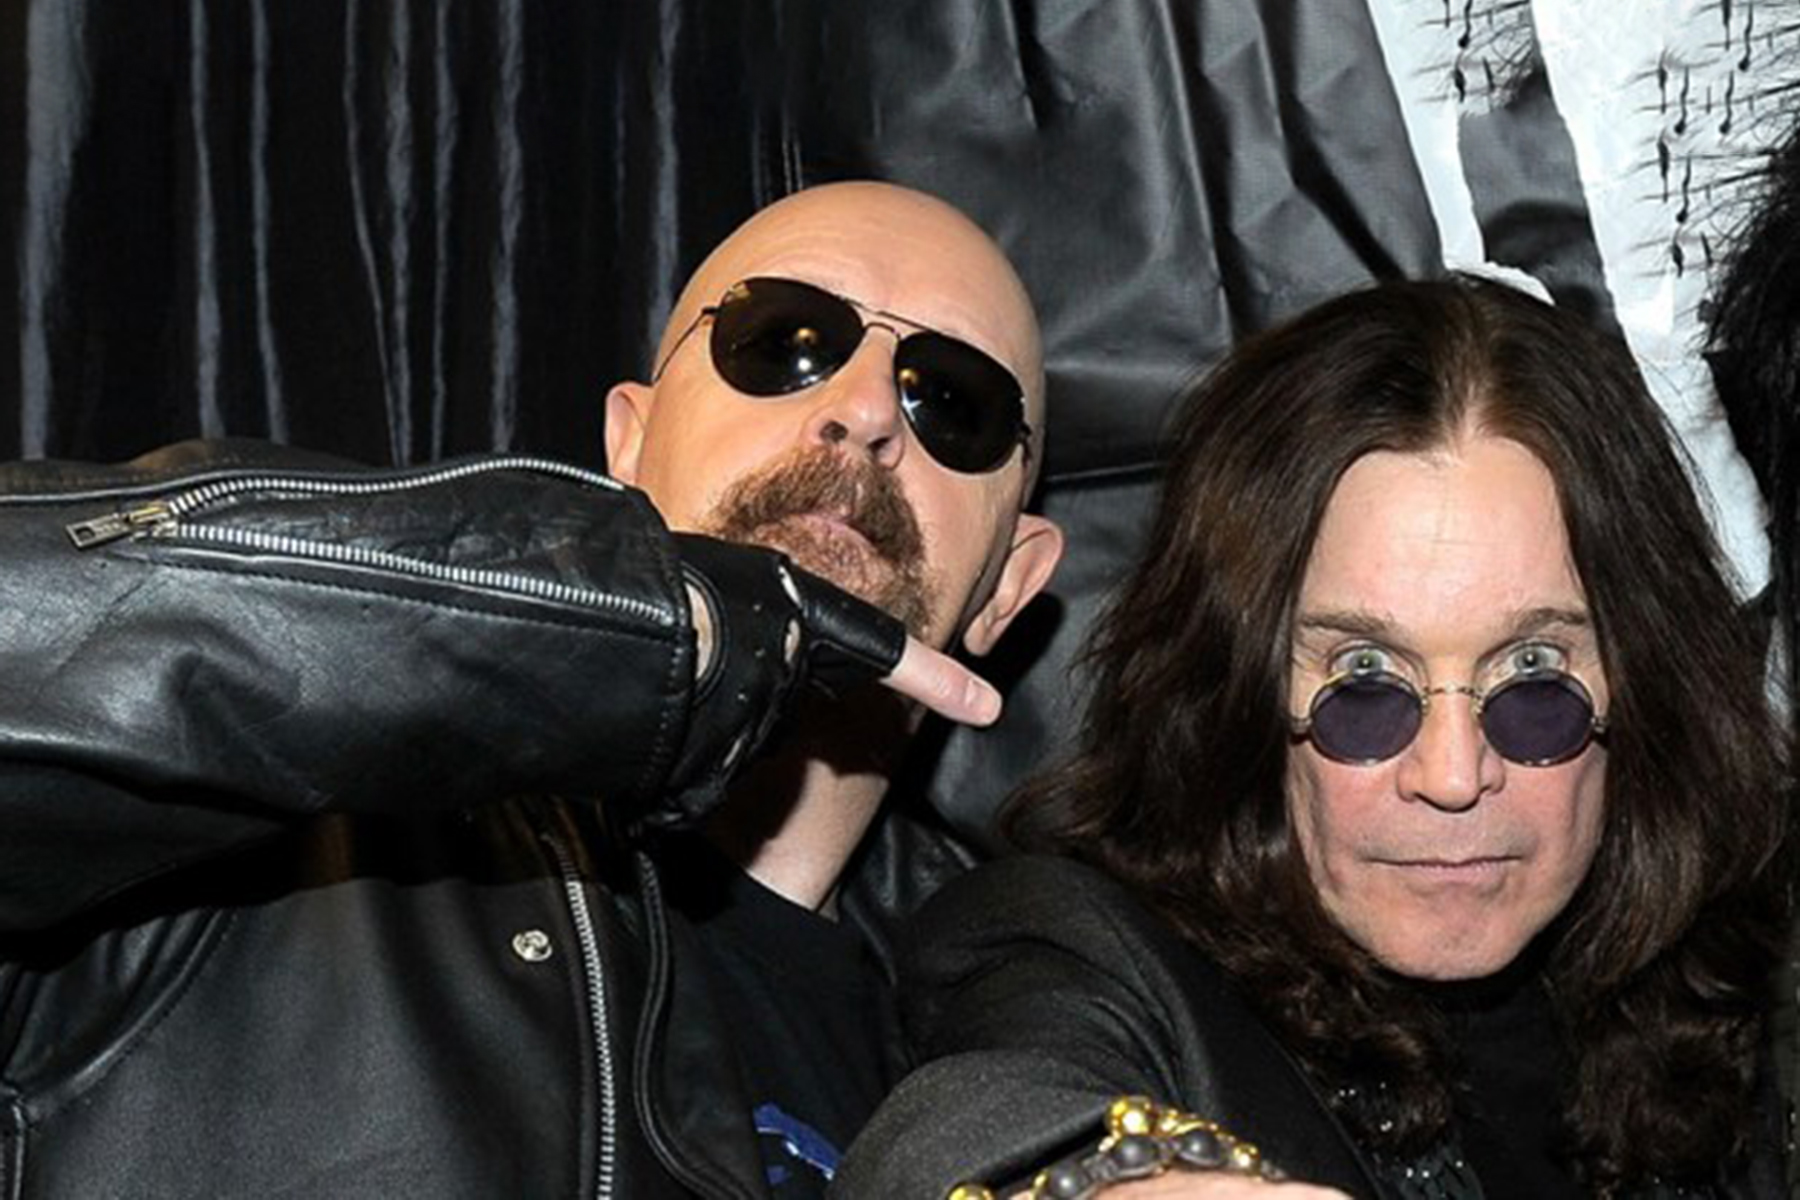 OZZY OSBOURNE to Hit Europe with JUDAS PRIEST As Special Guests In Early 2019